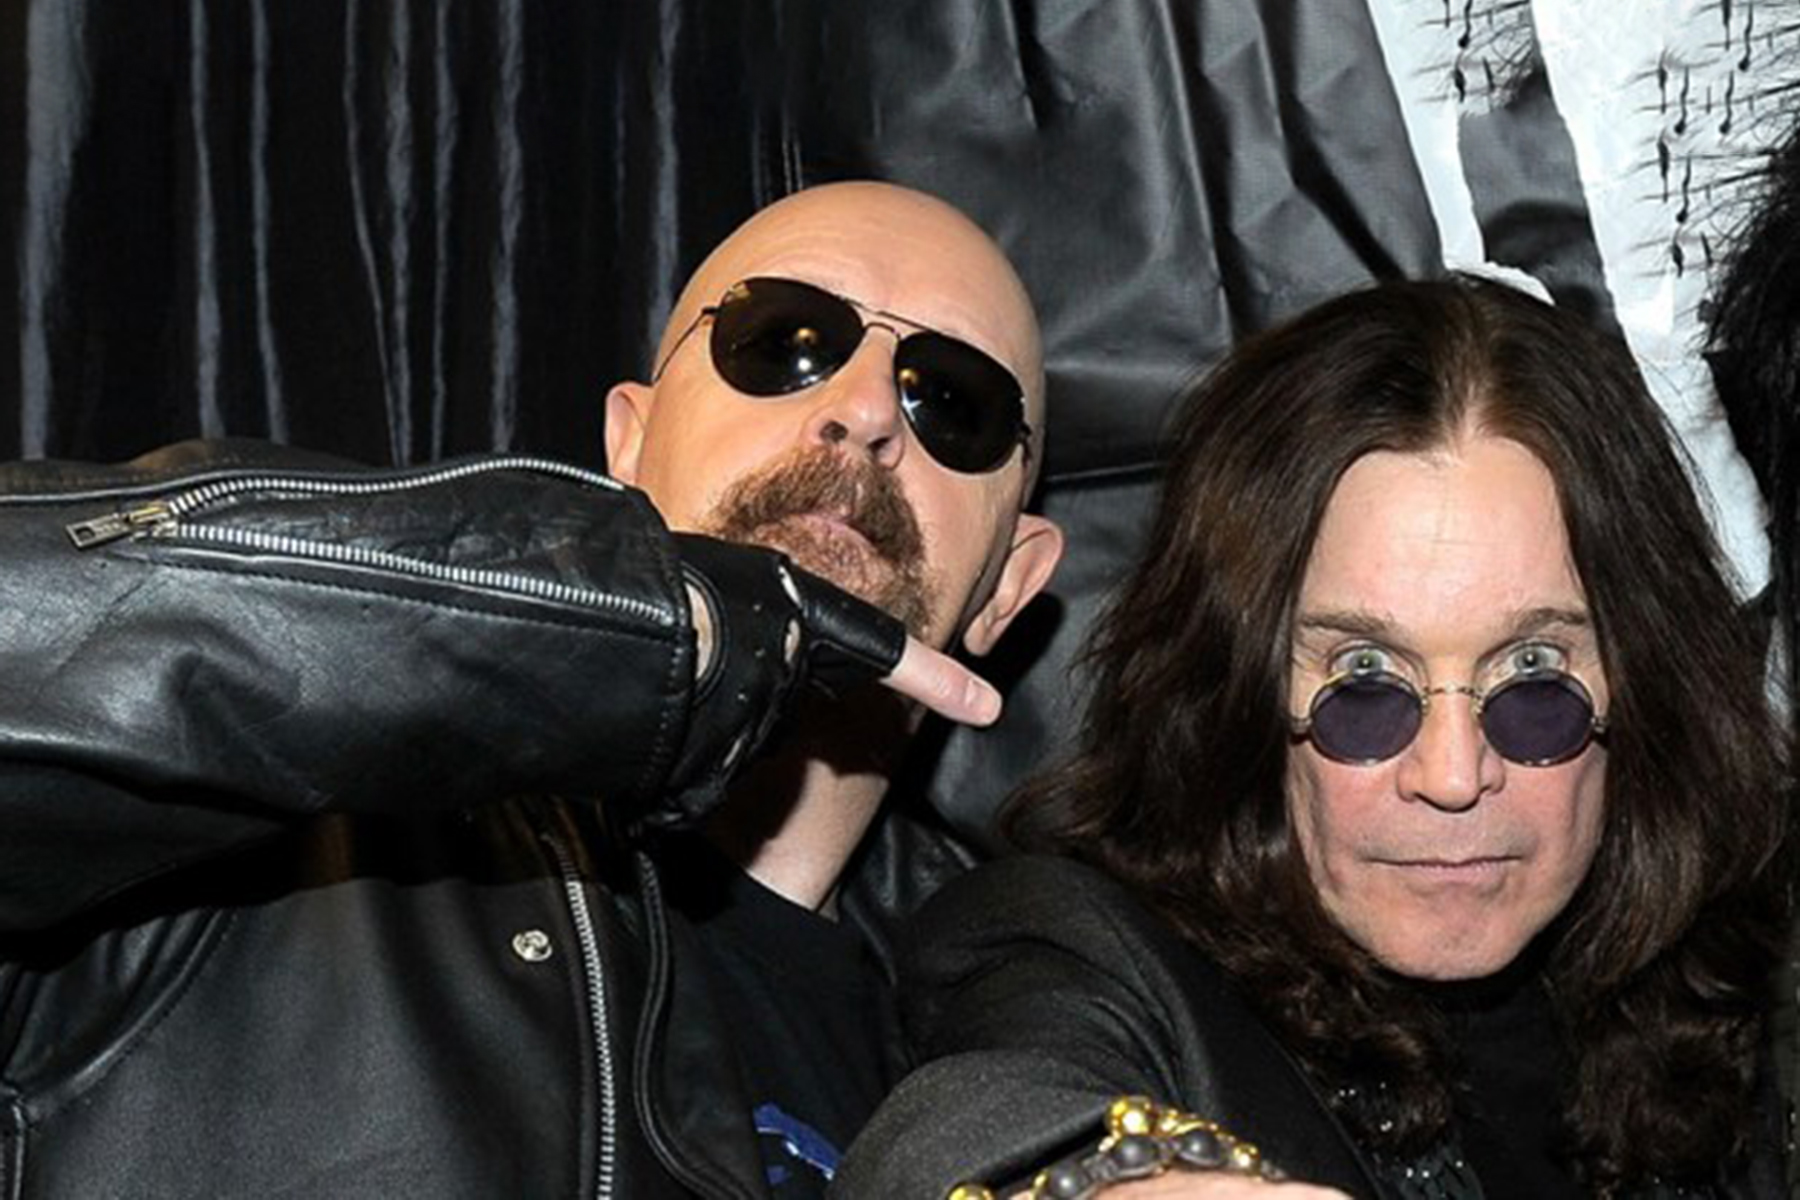 OZZY OSBOURNE to Hit Europe with JUDAS PRIEST As Special Guests In Early 2019